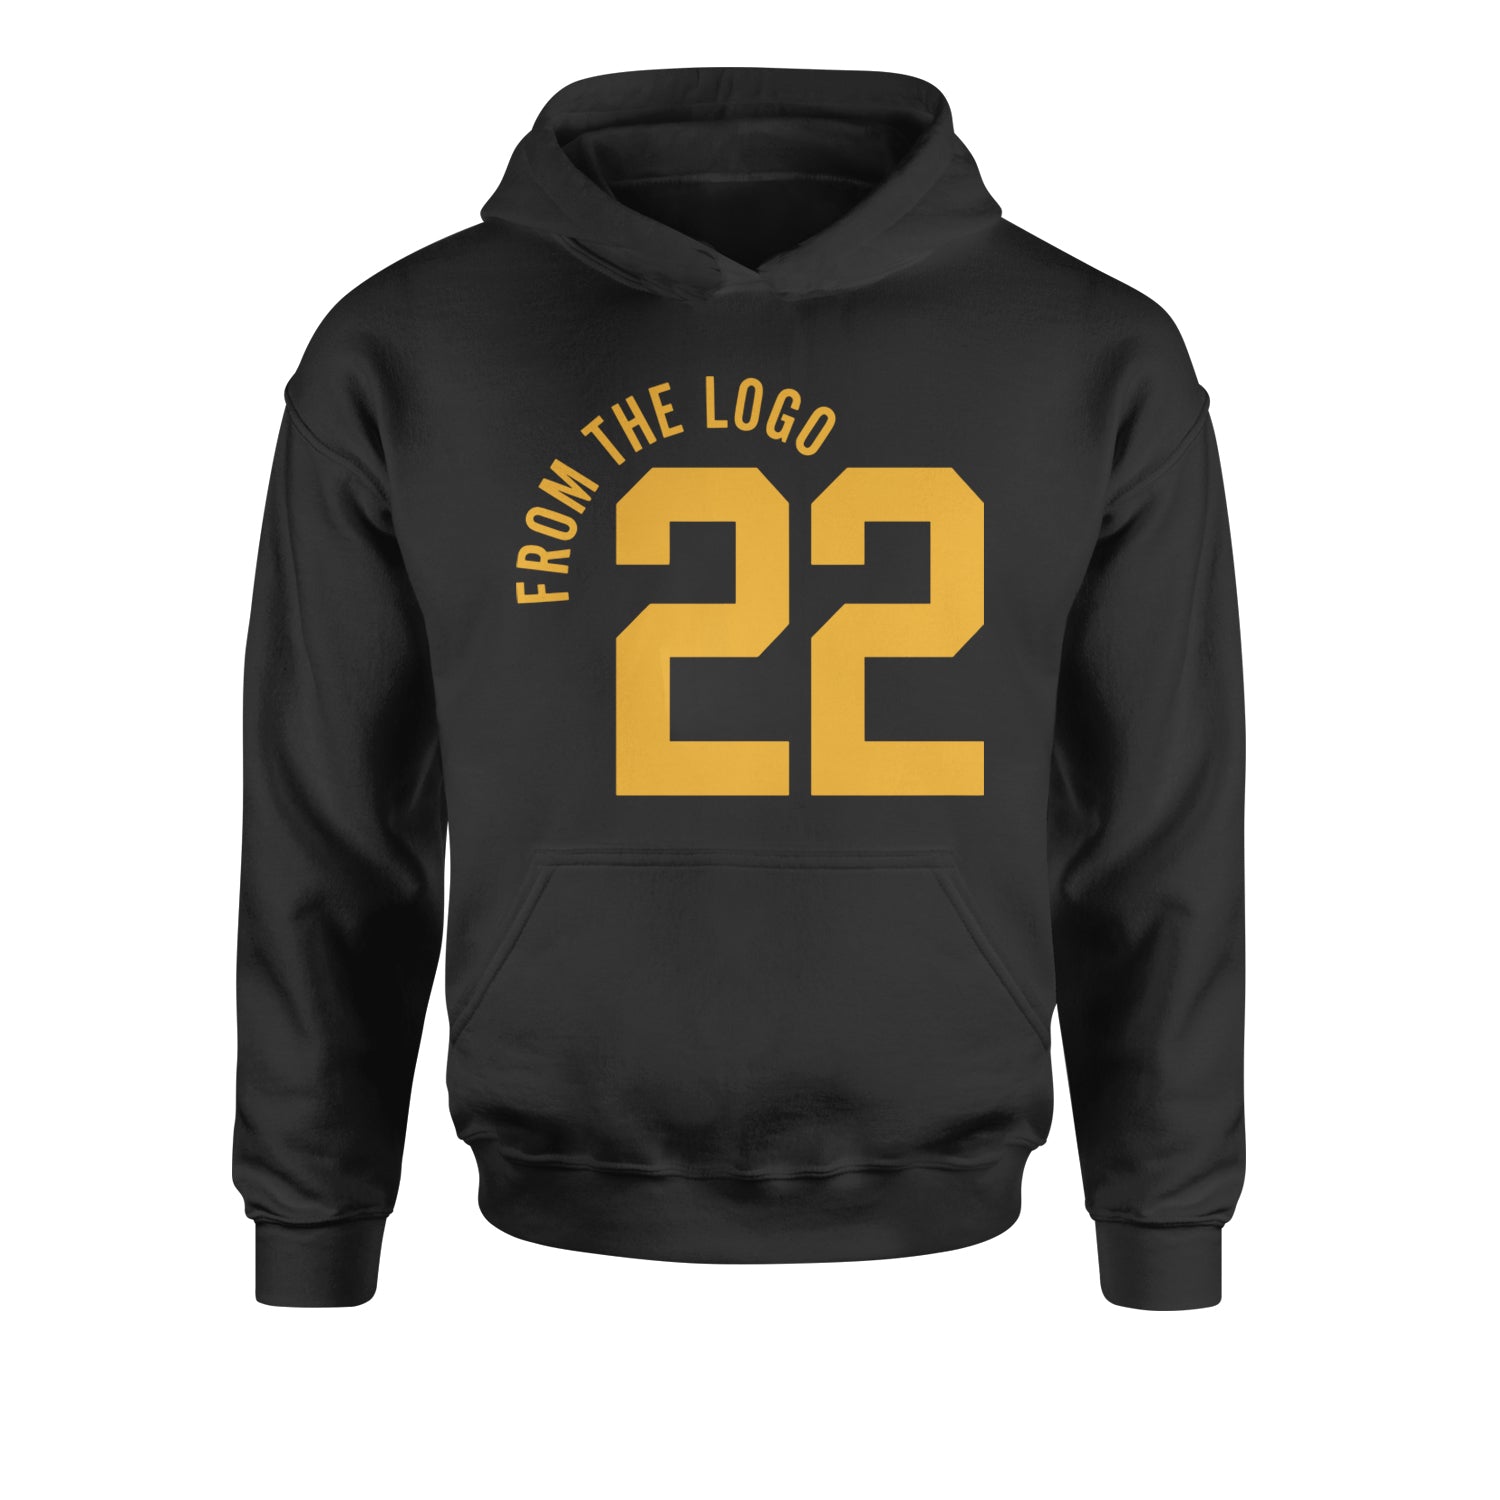 From The Logo #22 Basketball Youth-Sized Hoodie